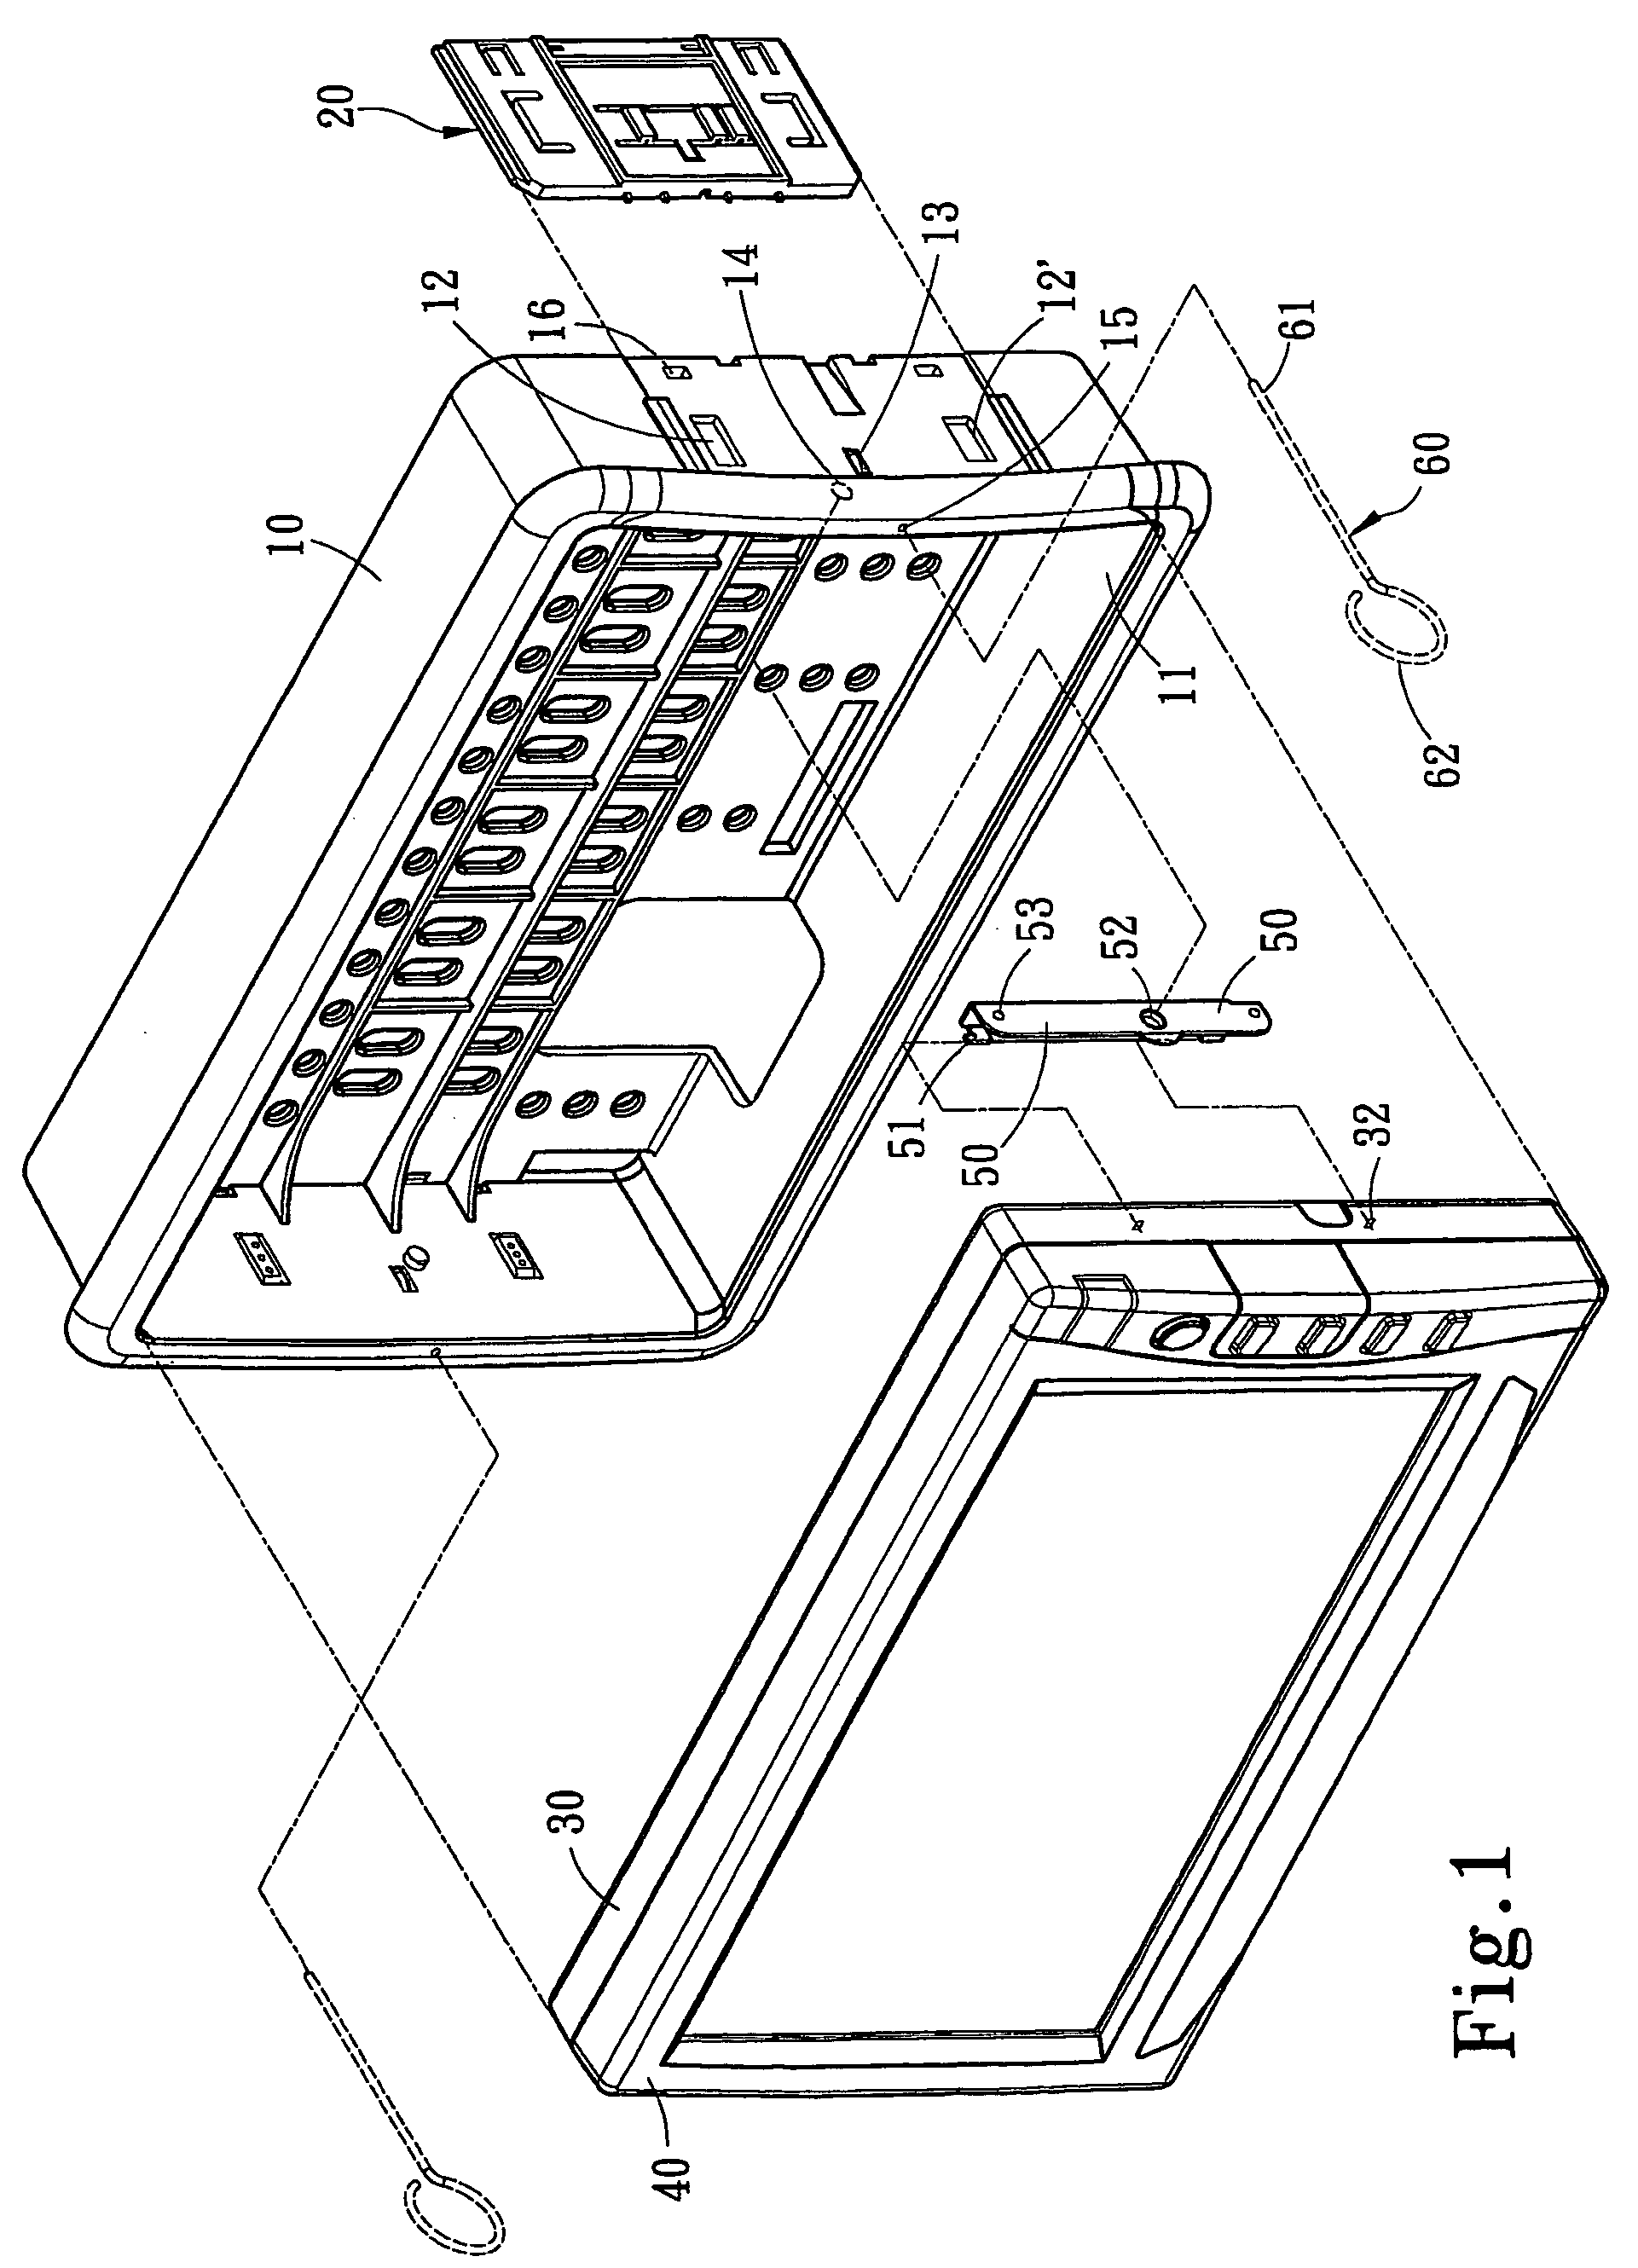 Mounting apparatus of displayer suitable for external installation and inset installation